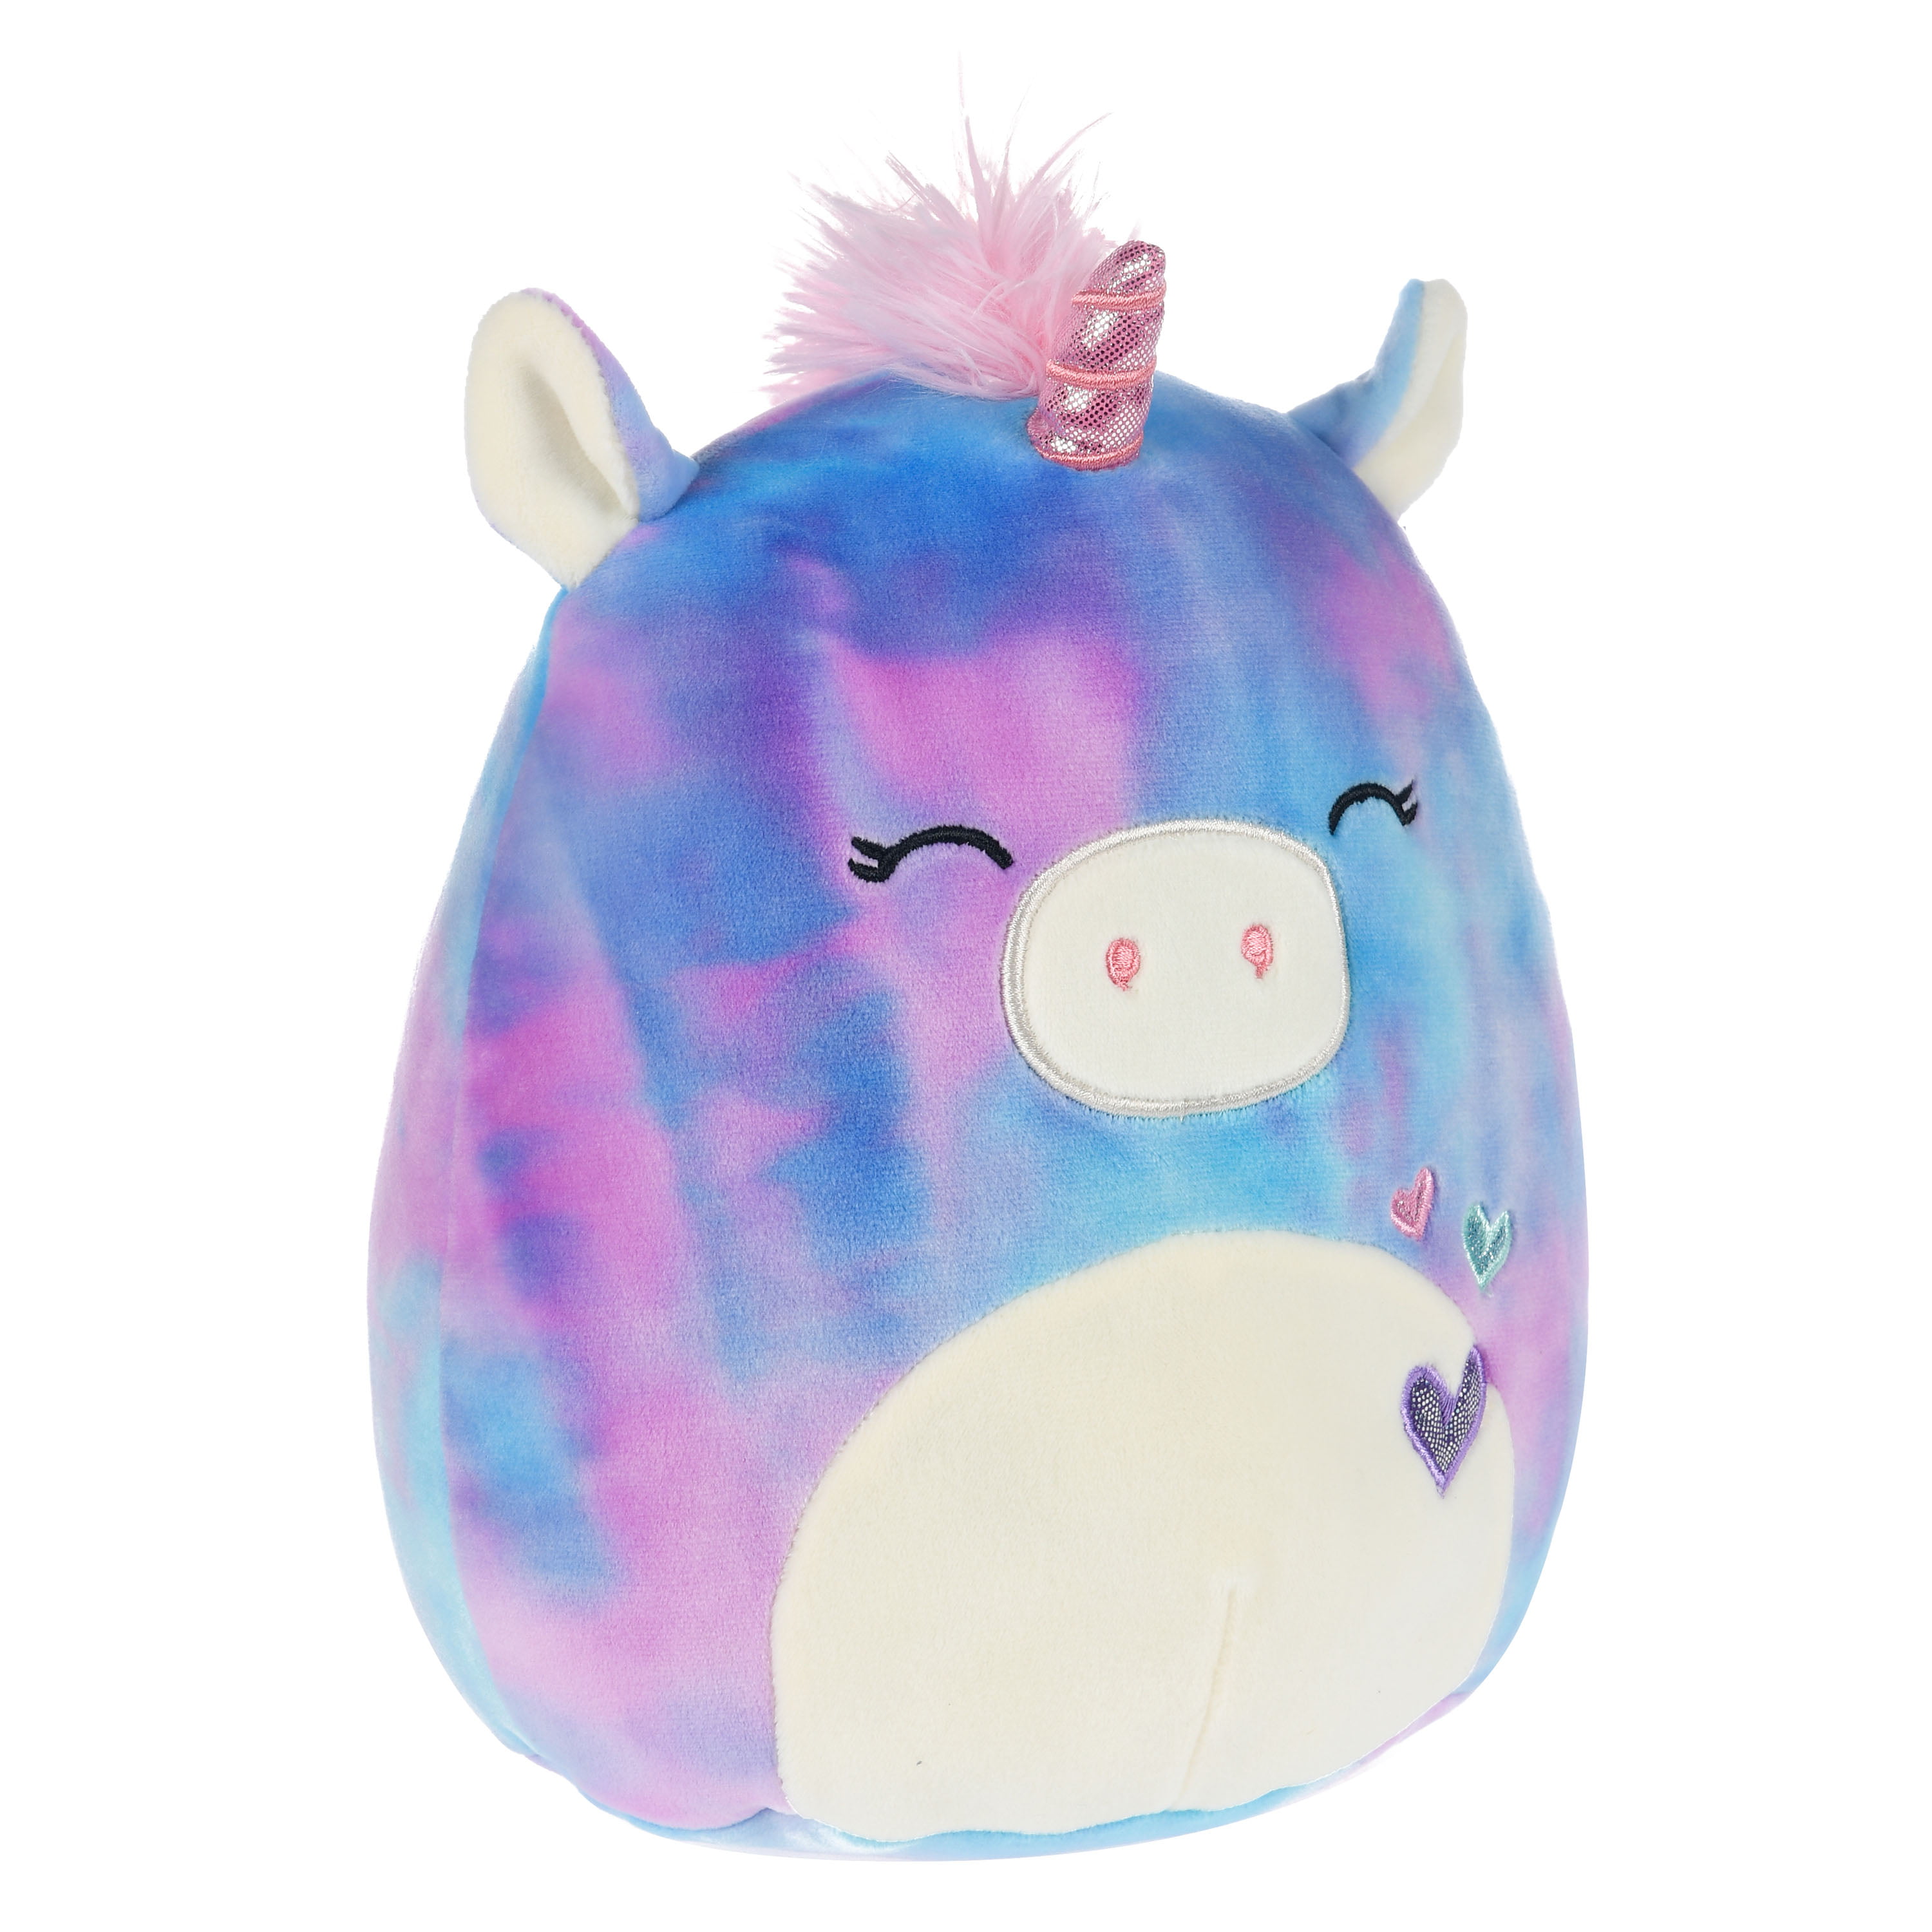 Details about   NWT Squishmallow Lonnie The Unicorn 9.5” Stuffed Animal SQUISH  MALLOW